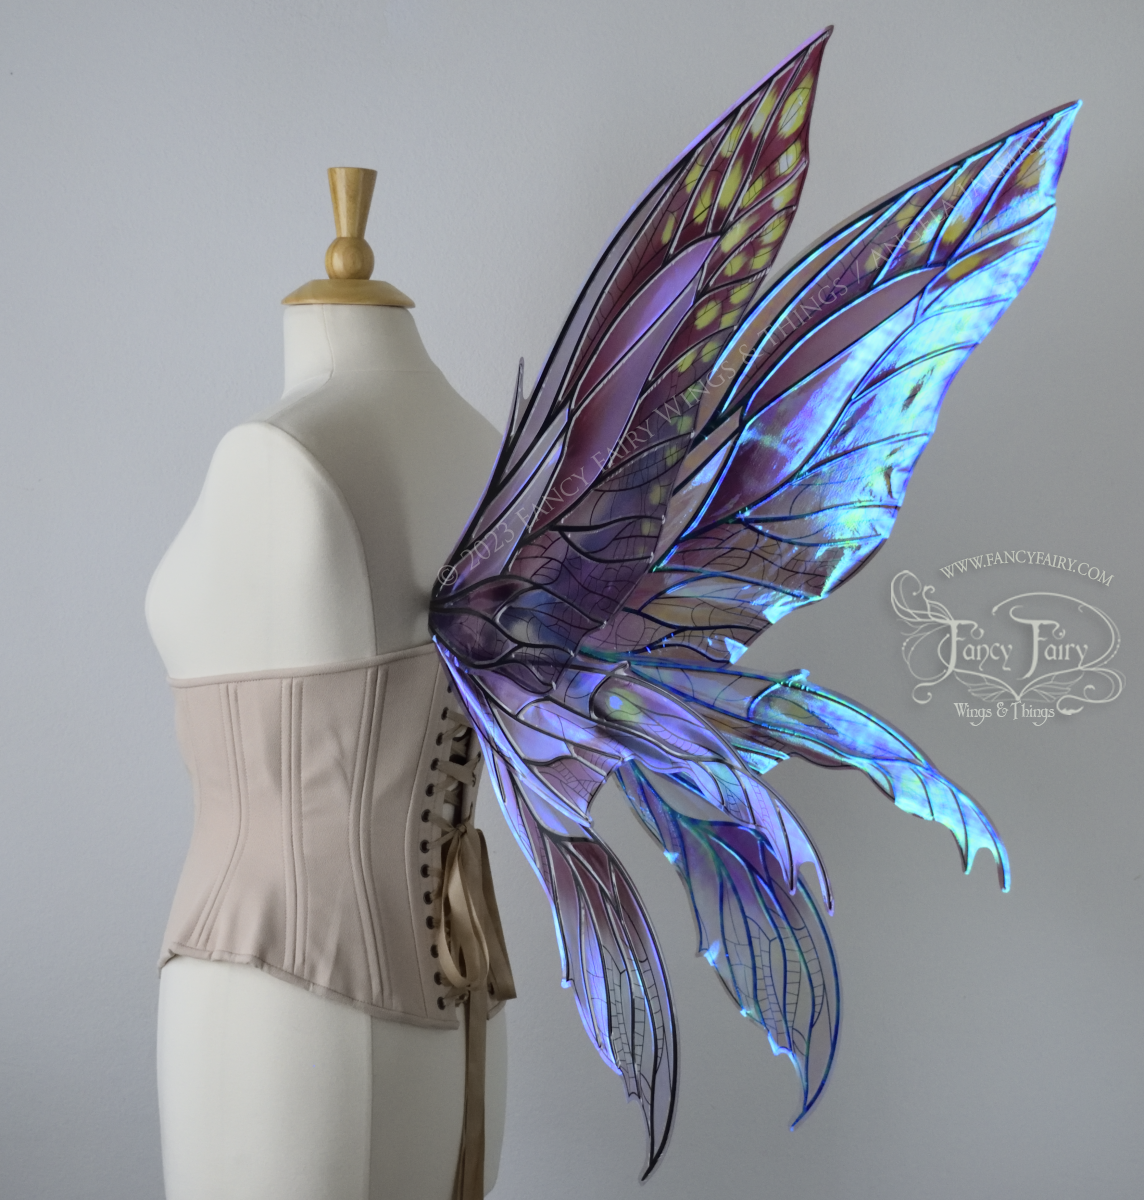 Back 3/4 view of dress form wearing large plum iridescent fairy wings with green accents. 3 pointed panels each side, detailed black veins